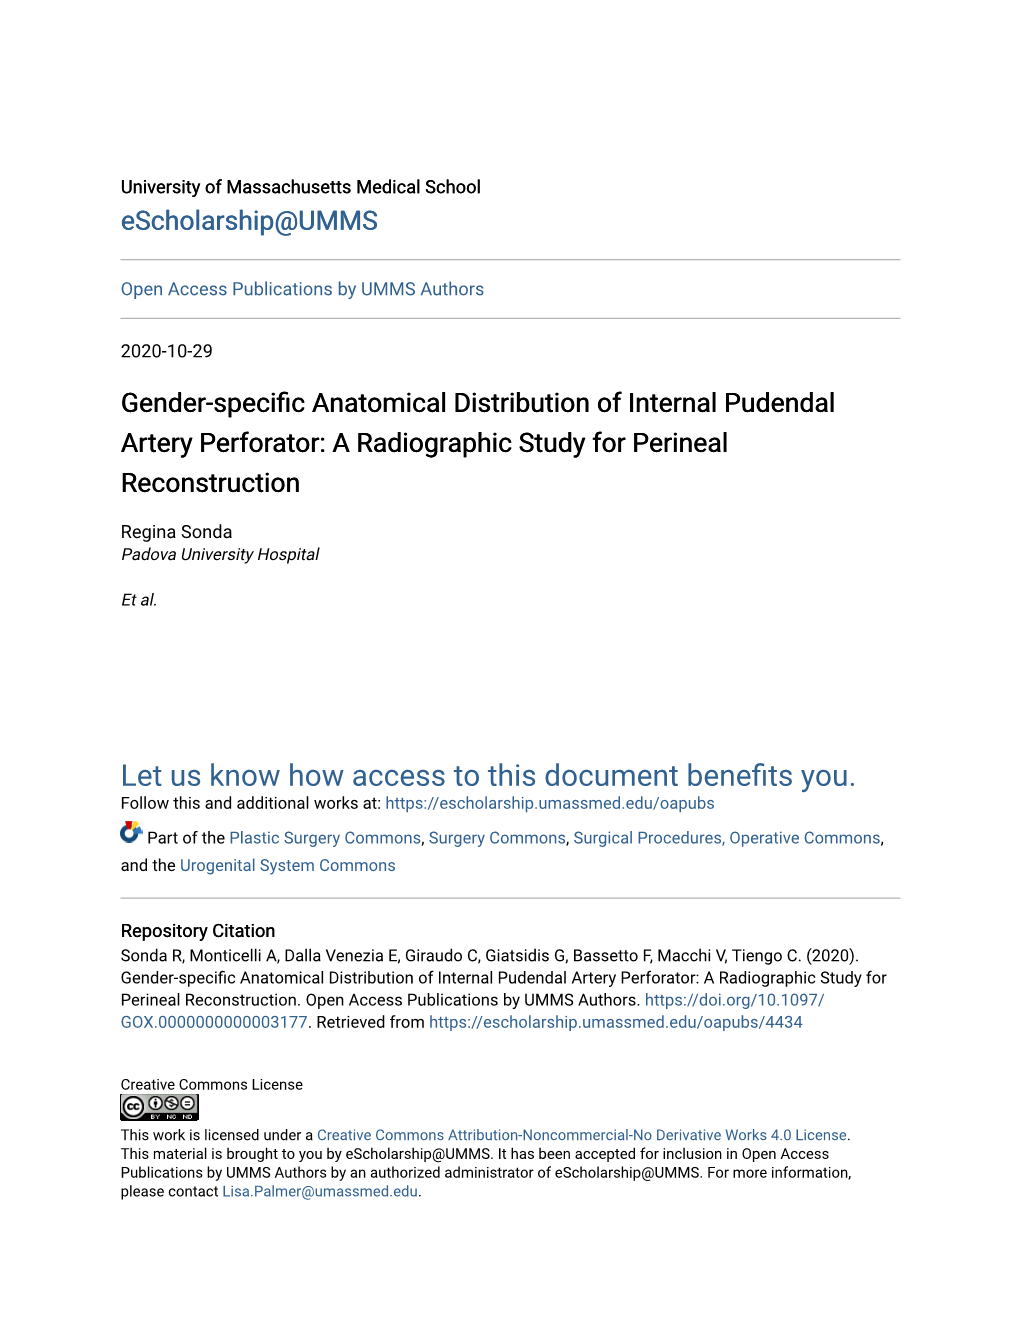 Gender-Specific Anatomical Distribution of Internal Pudendal Artery Perforator: a Radiographic Study for Perineal Reconstruction